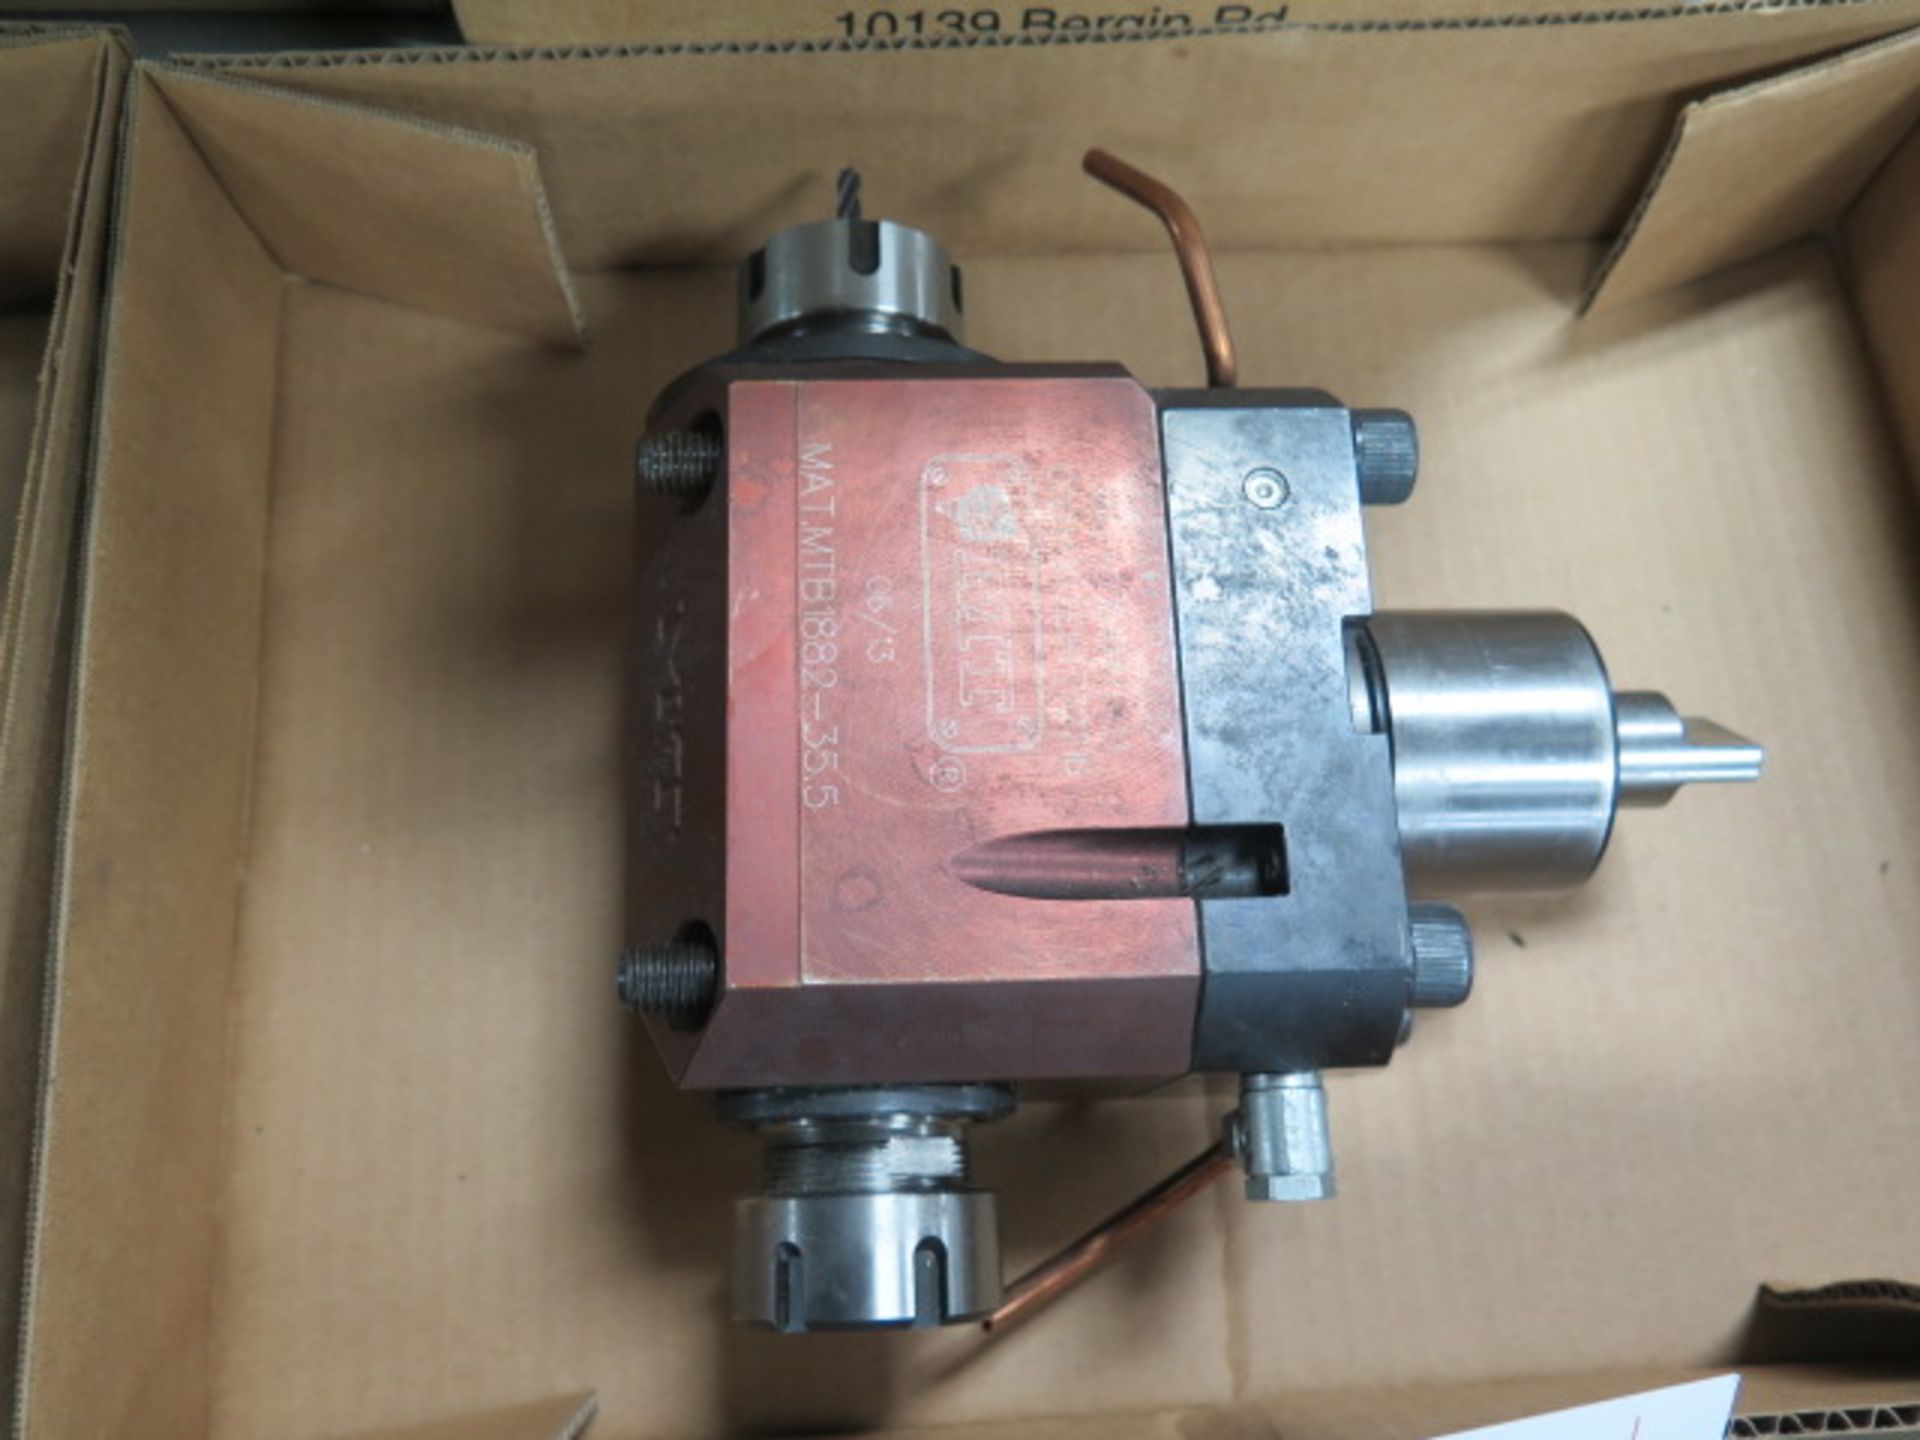 MT Twin Head Radial Drilling/Milling Head(SOLD AS-IS - NO WARRANTY) - Image 2 of 6